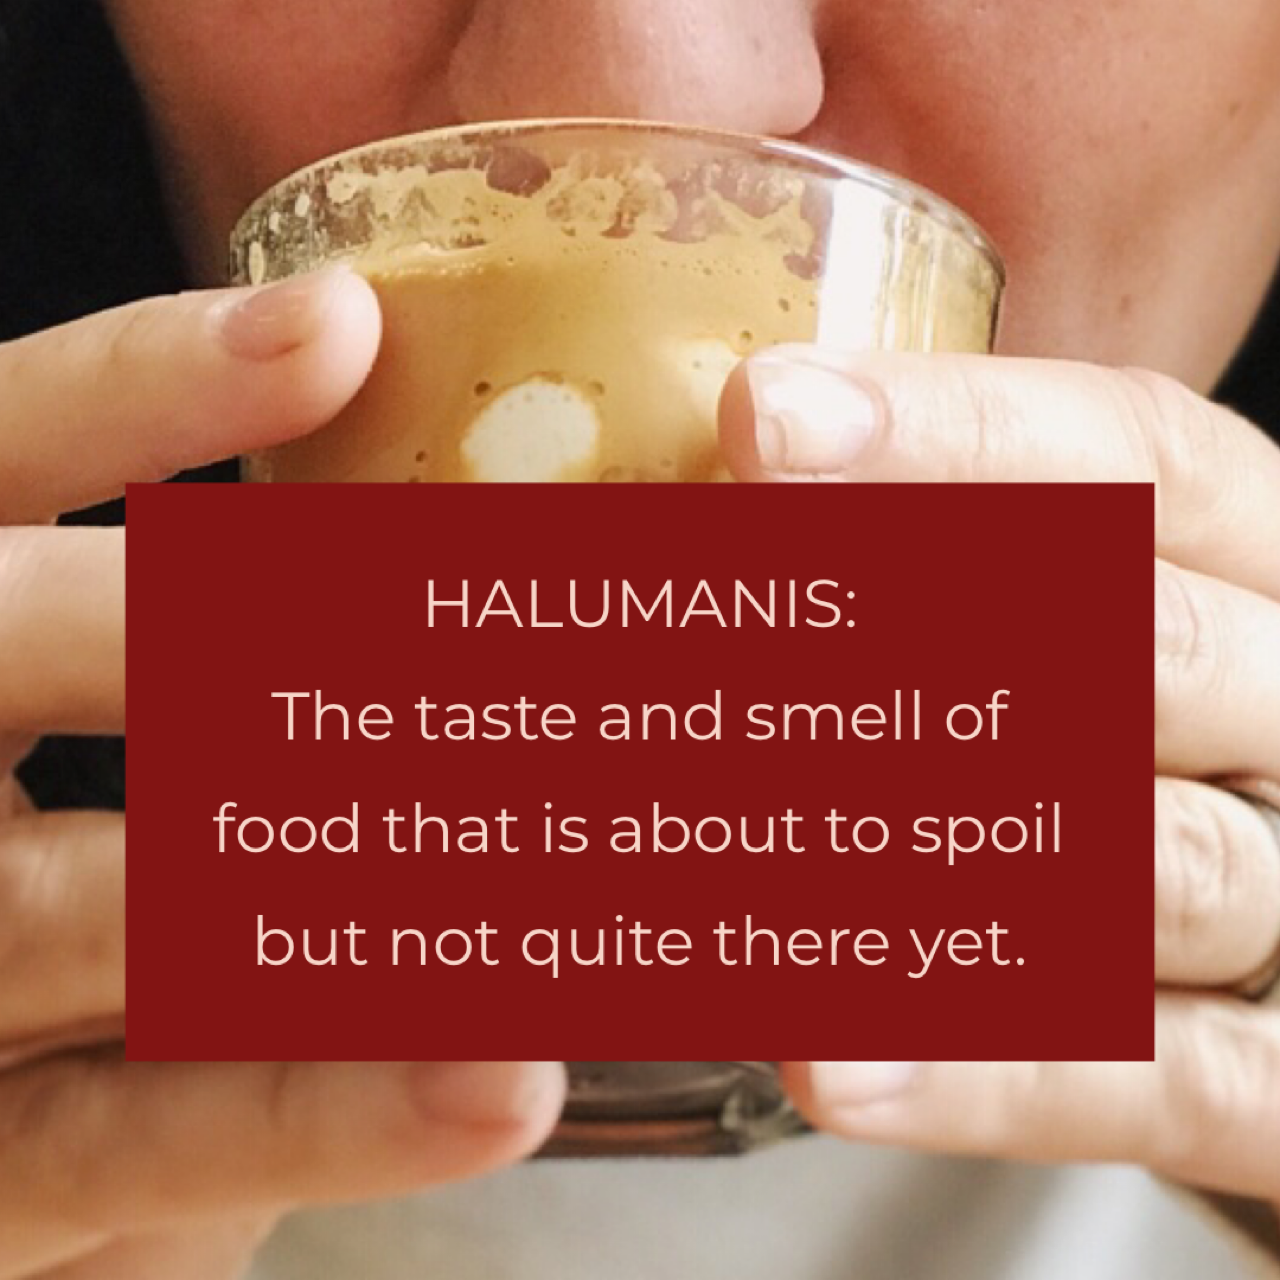 Halumanis: Taste and smell of food that is about to spoil